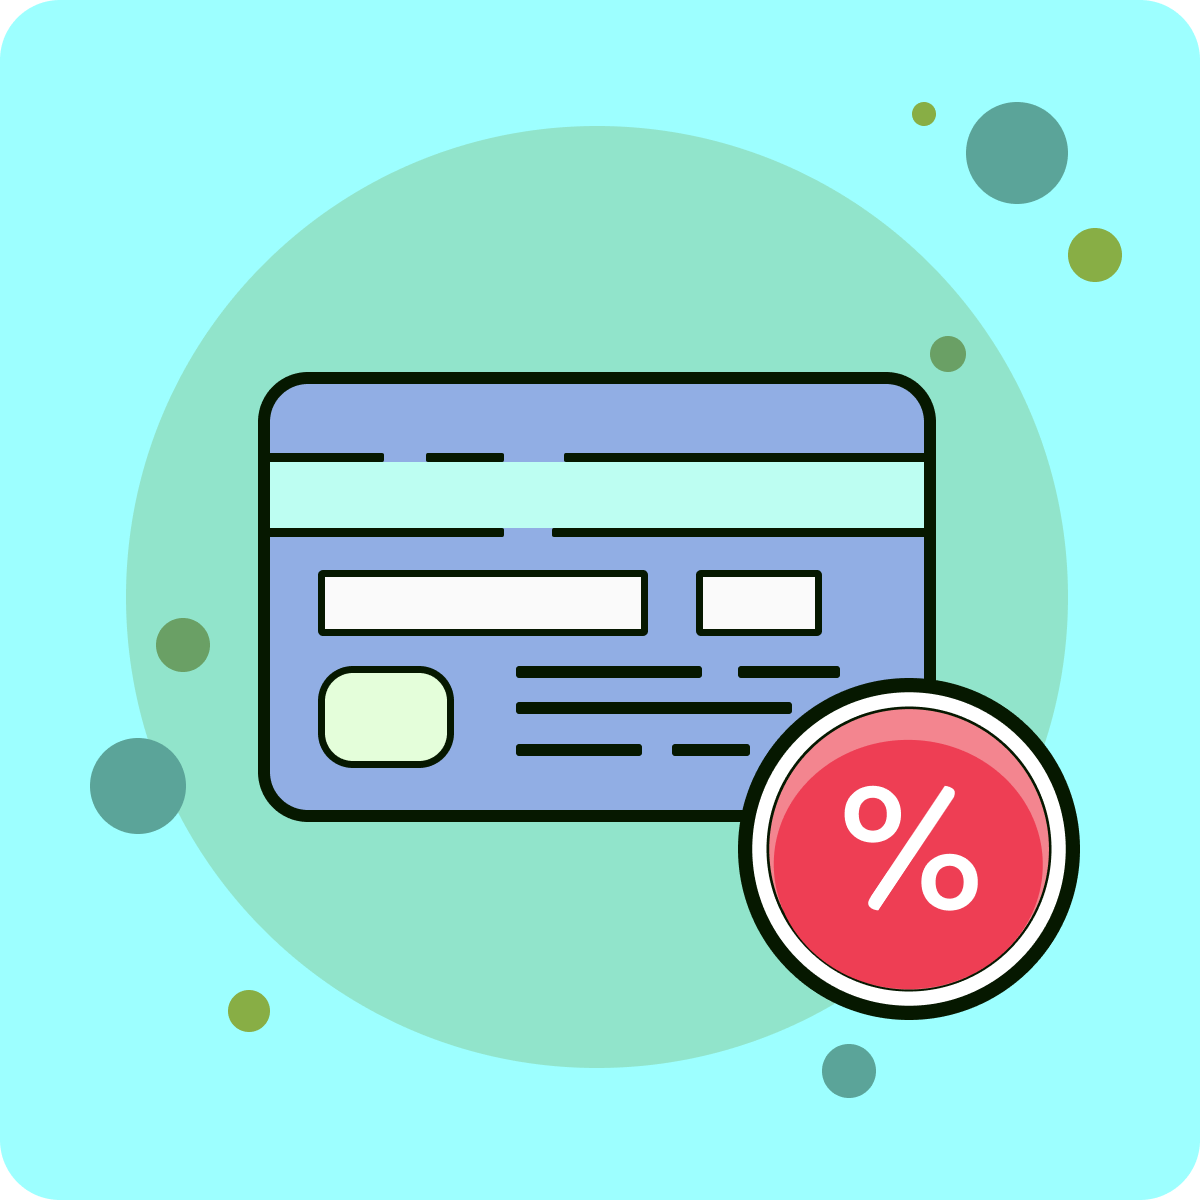 Hire Shopify Experts to integrate PioPay Discount Payment Method app into a Shopify store